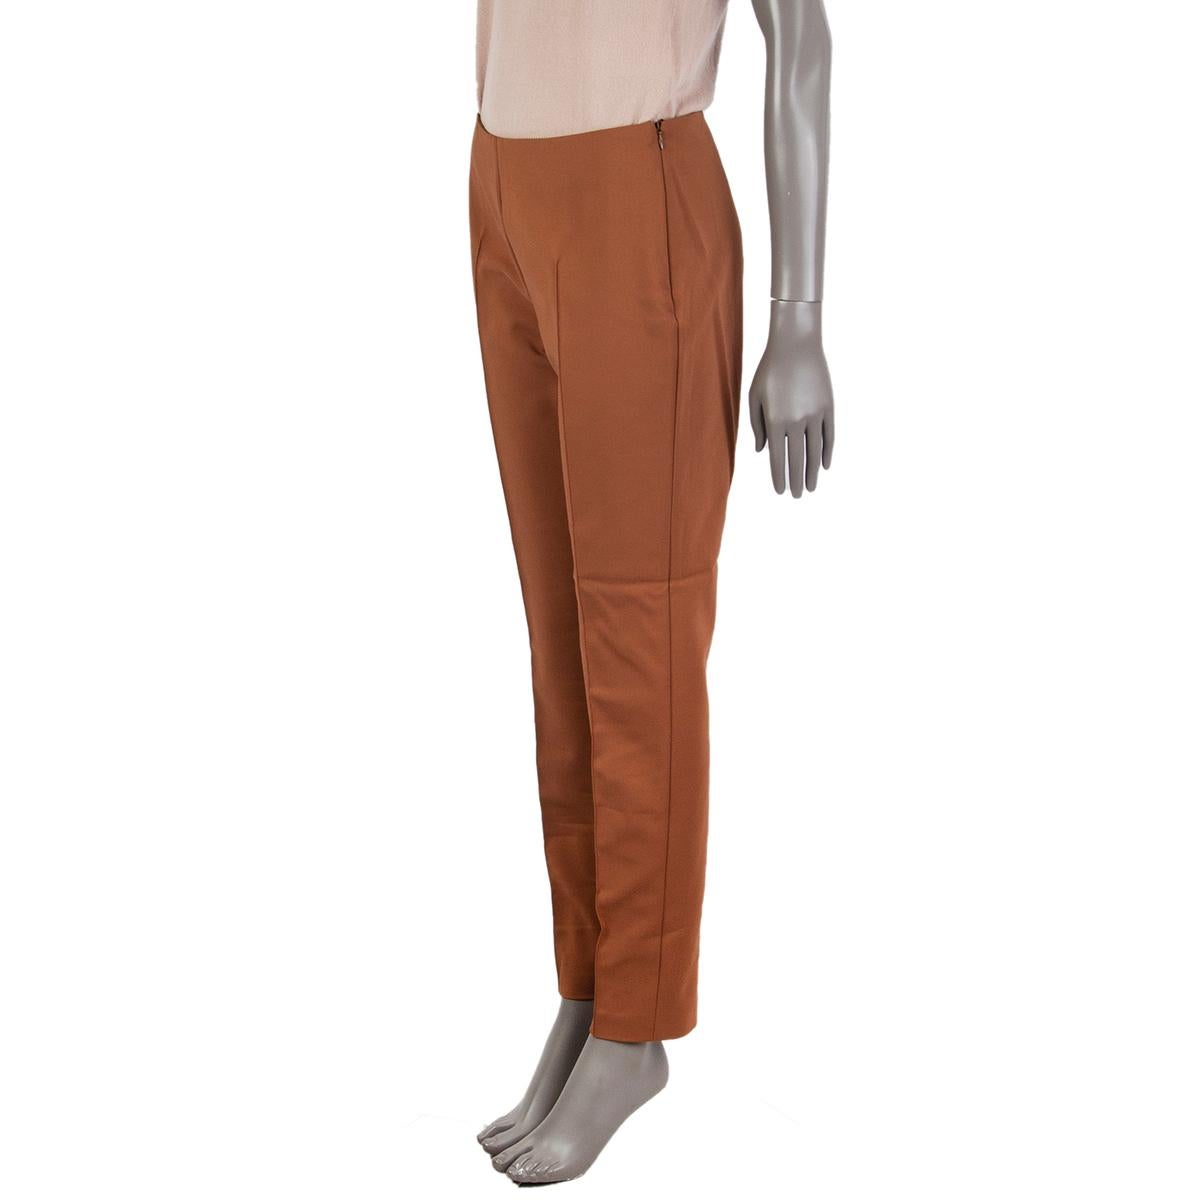 100% authentic AKRIS cigarette pants in cognac cotton (51%) polyamide (42%) elastane (7%)  with a stitched-front, mid-high waist. Unlined. Closes with a concealed zipper on the left side. Has been worn and is in excellent